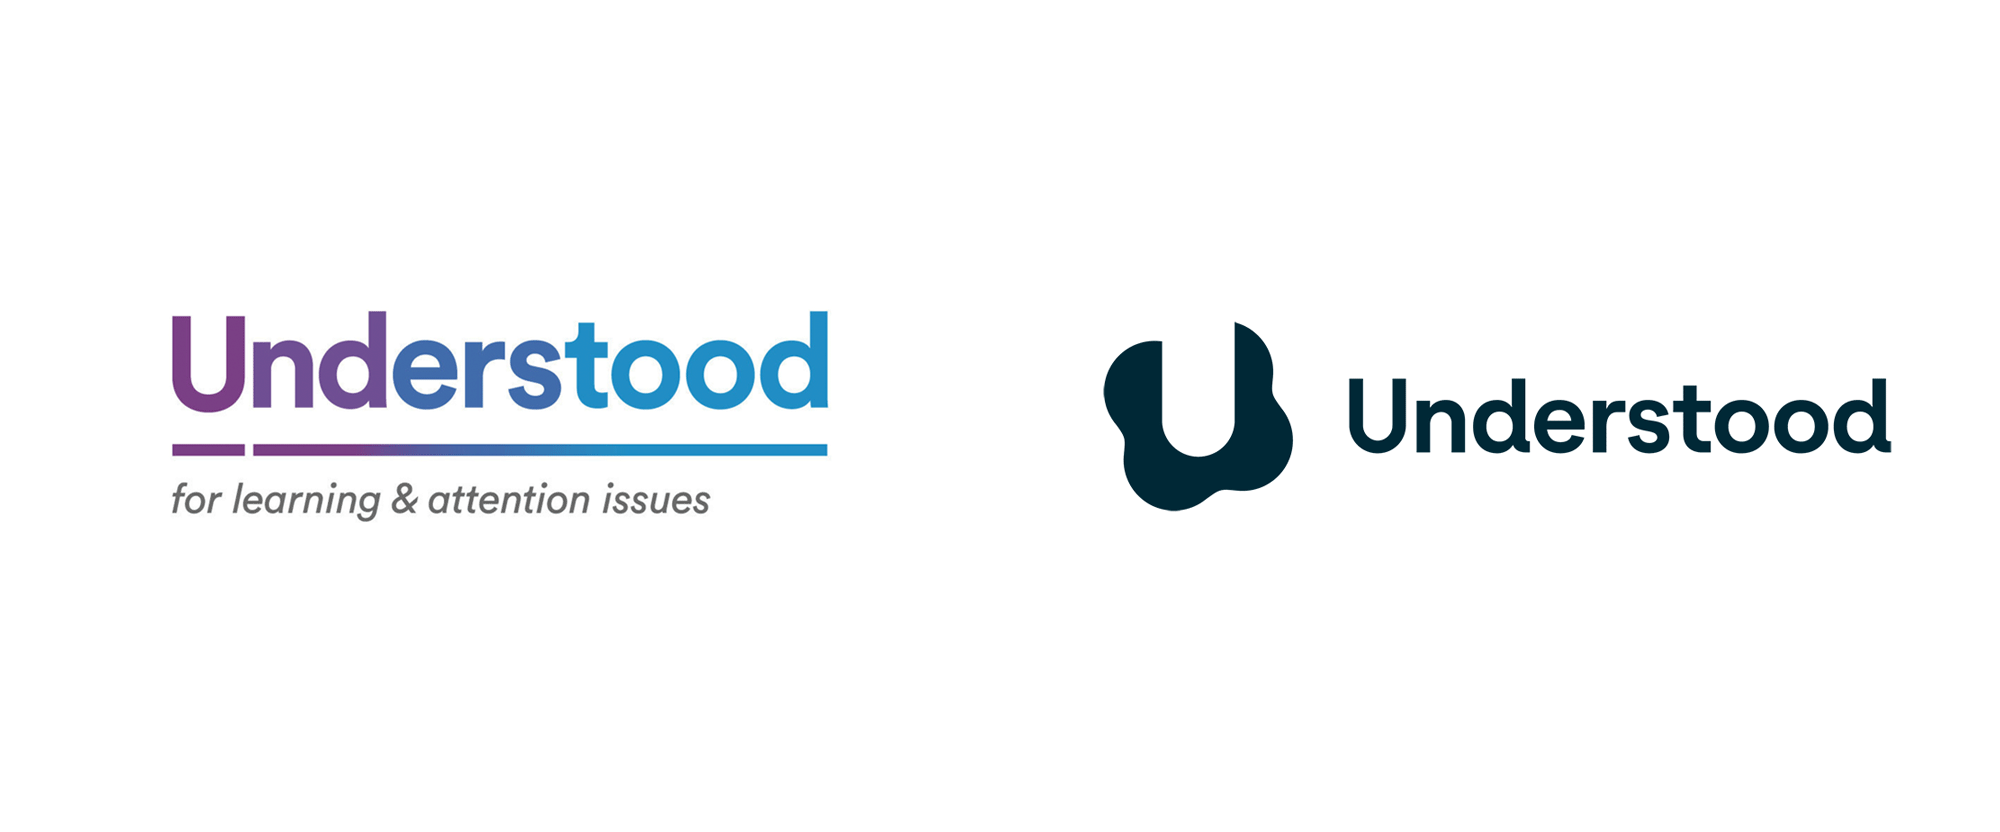 New Logo and Identity for Understood by Wolff Olins